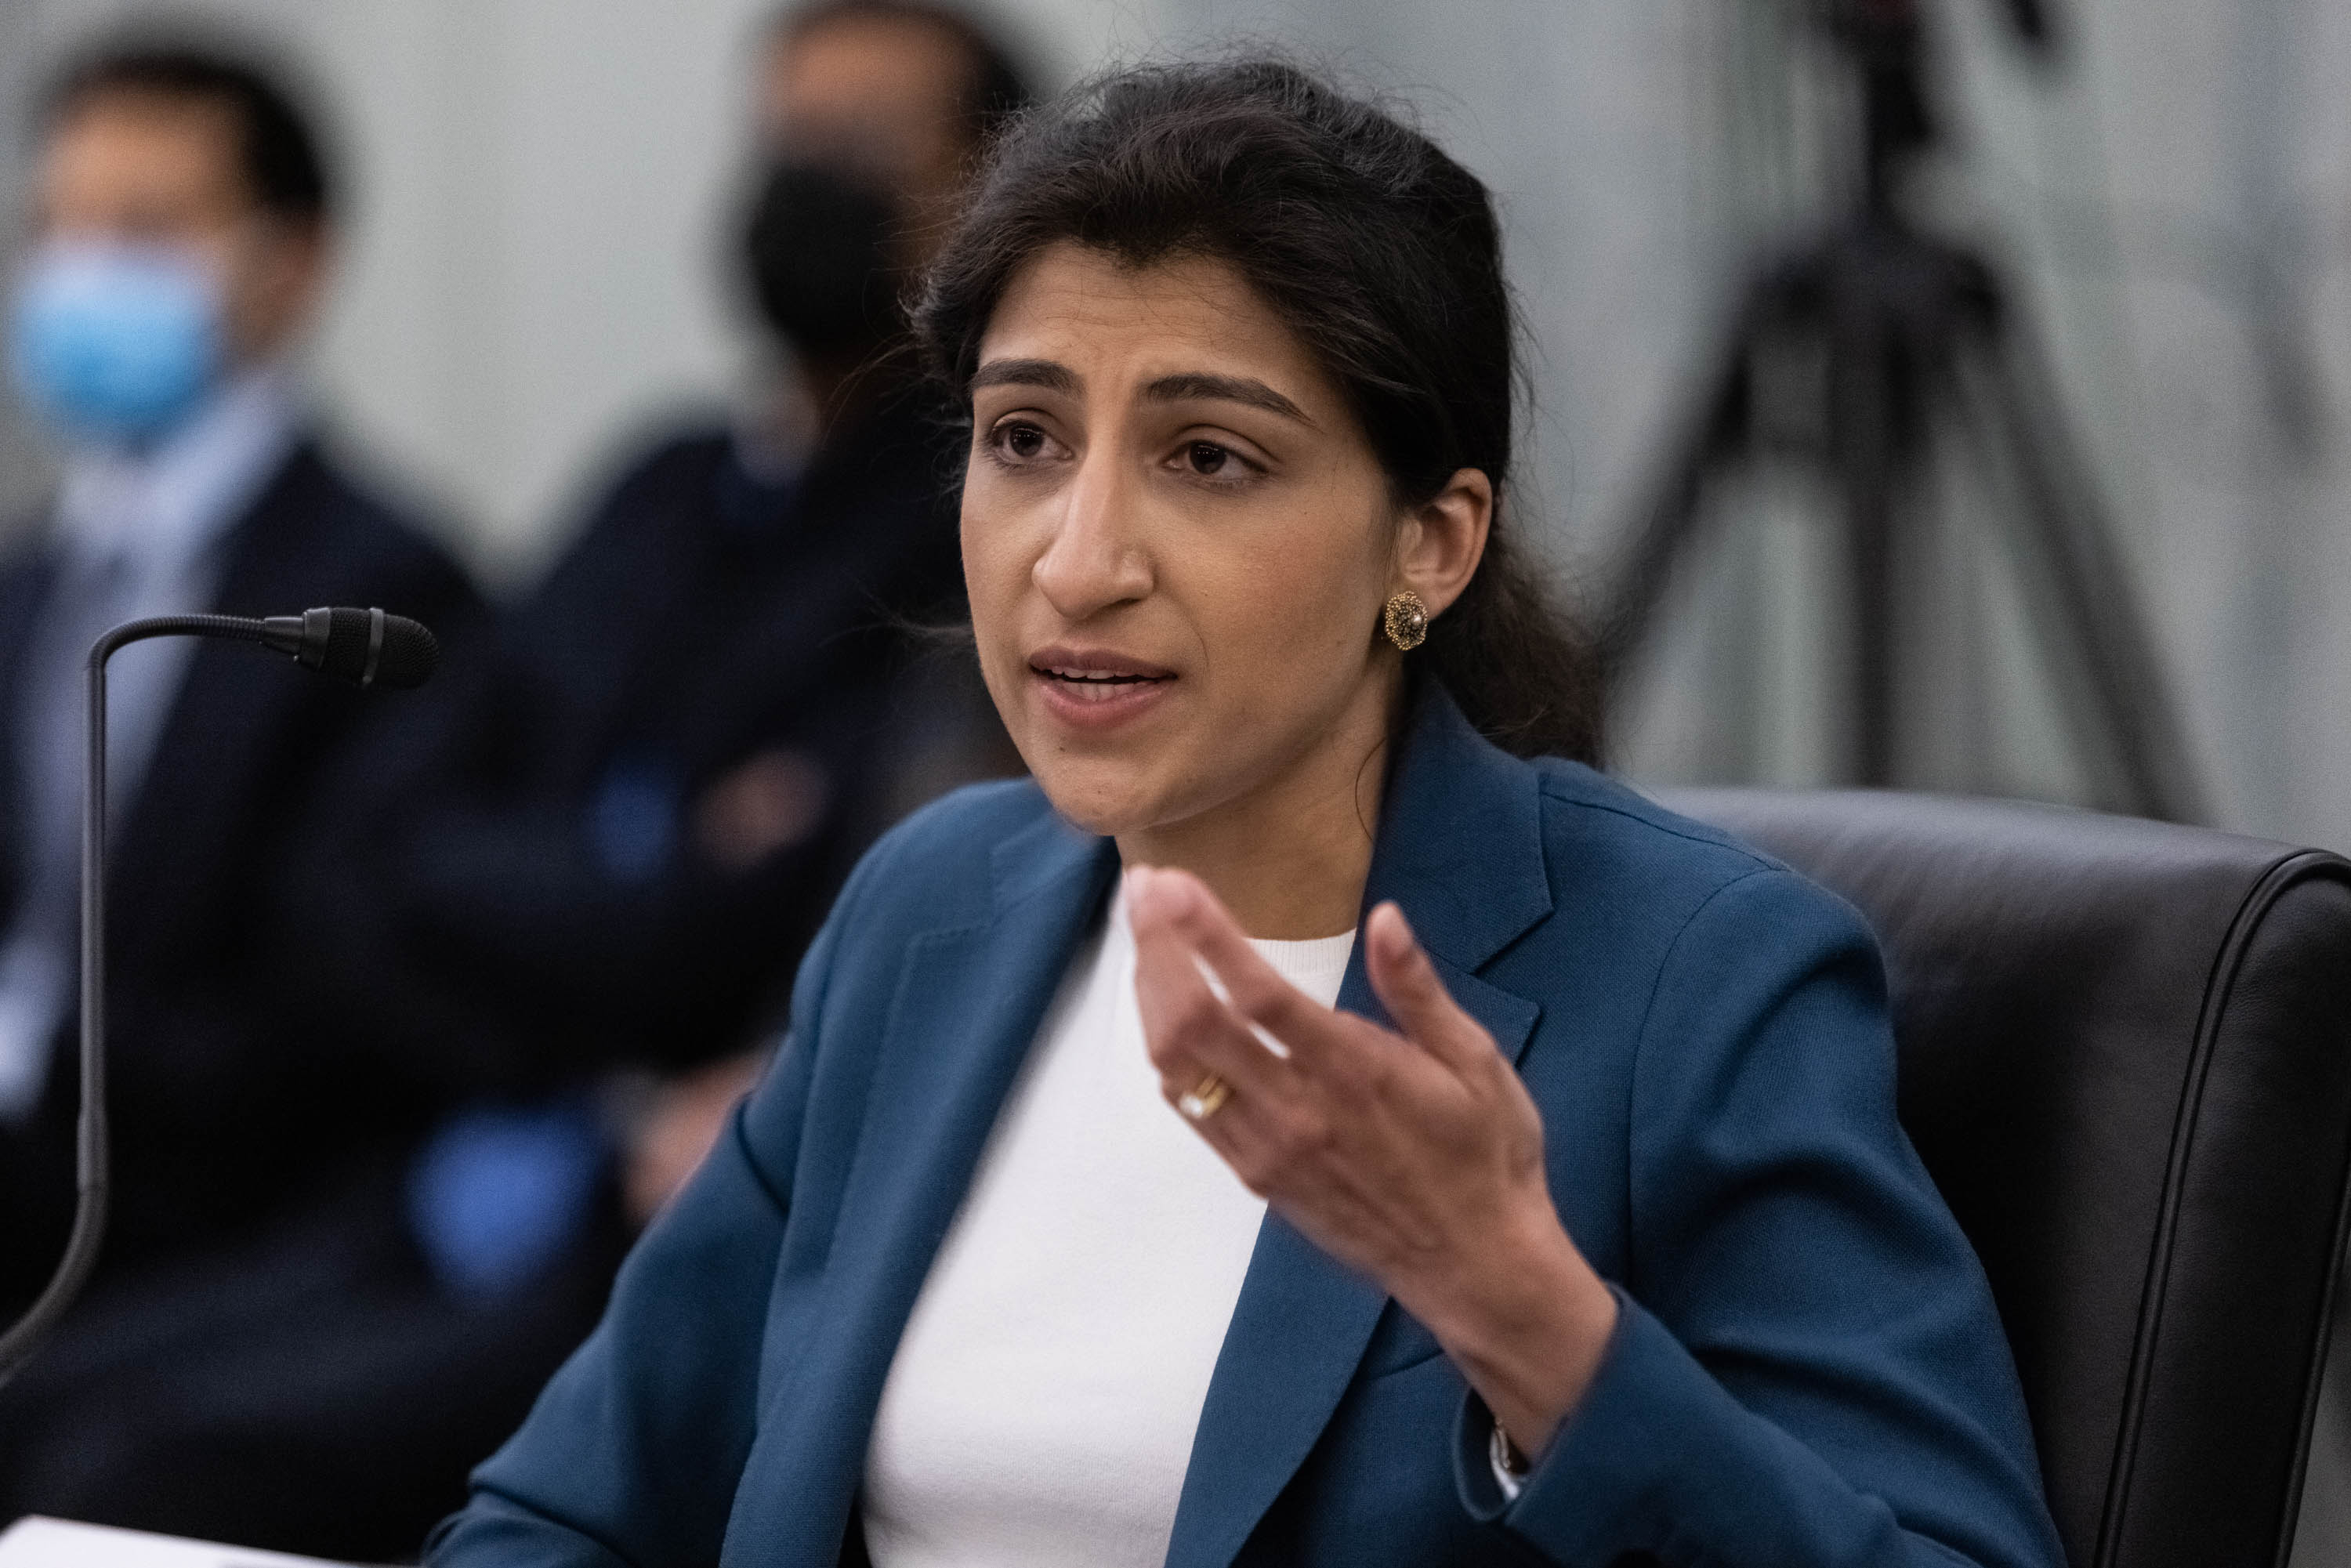 Lina Khan, commissioner of the Federal Trade Commission (FTC) nominee for U.S. President Joe Biden, speaks during a Senate Commerce, Science and Transportation Committee confirmation hearing in Washington, D.C.